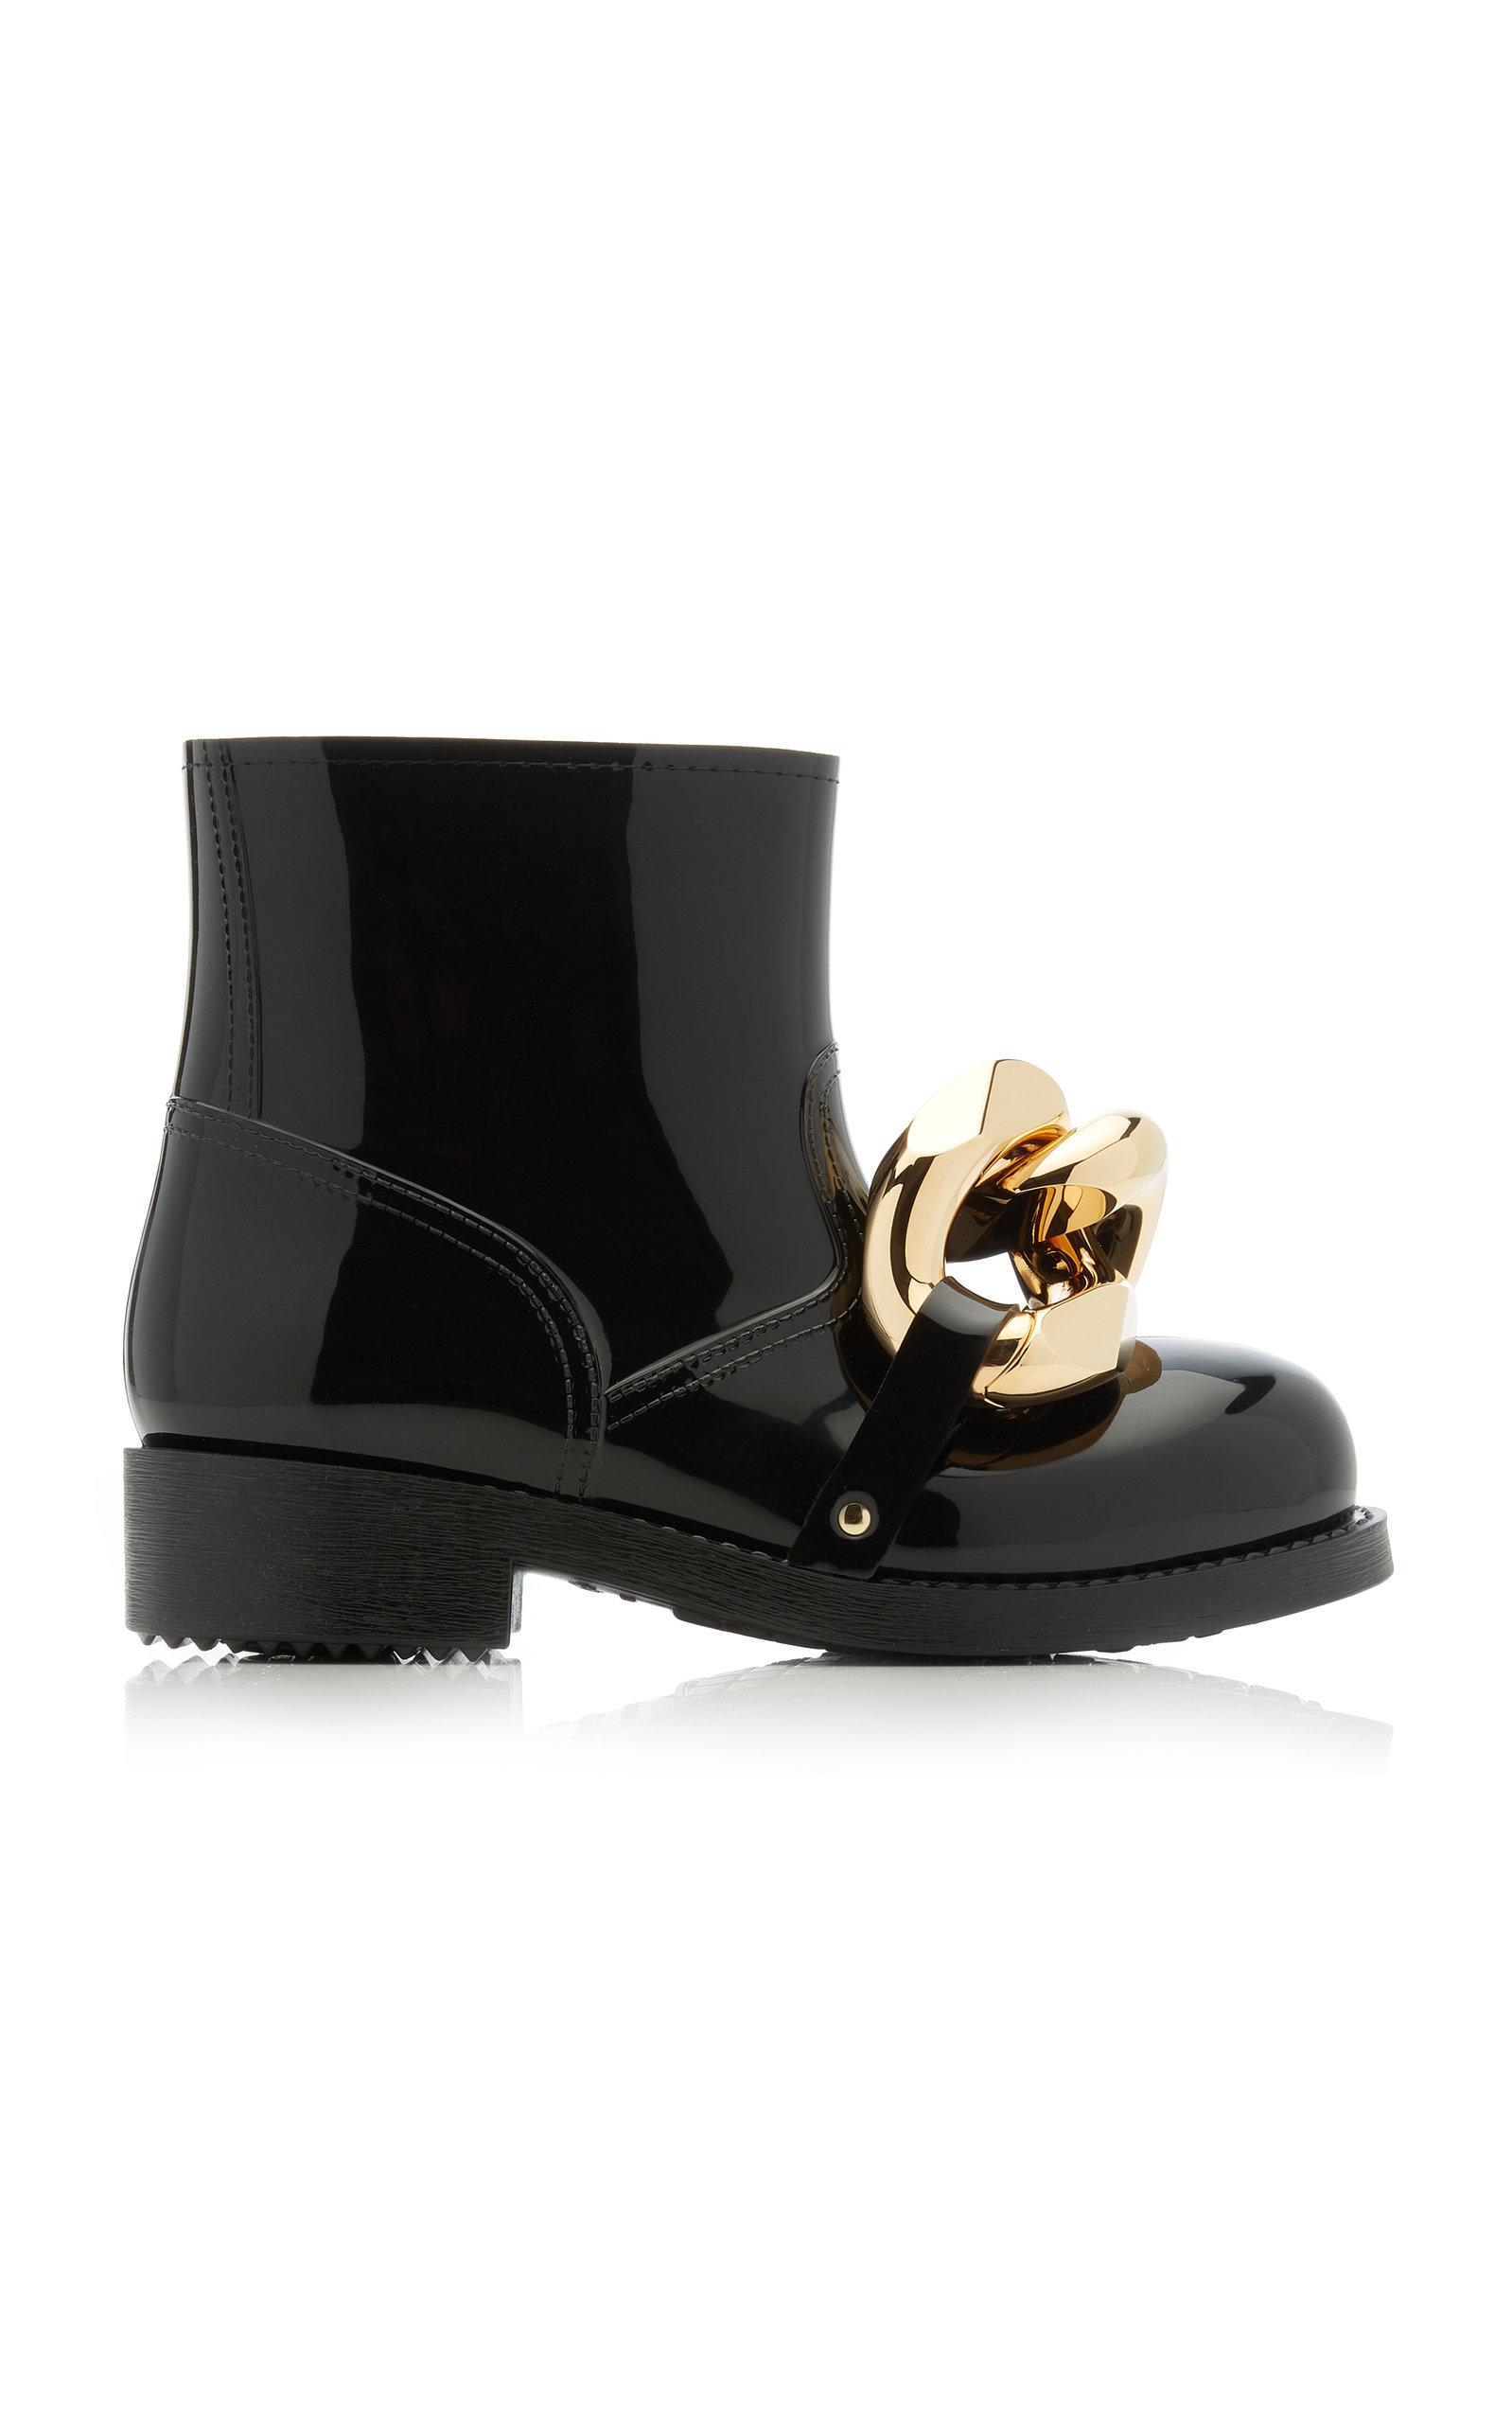 JW Anderson Chain-embellished Rubber Boots in Black | Lyst